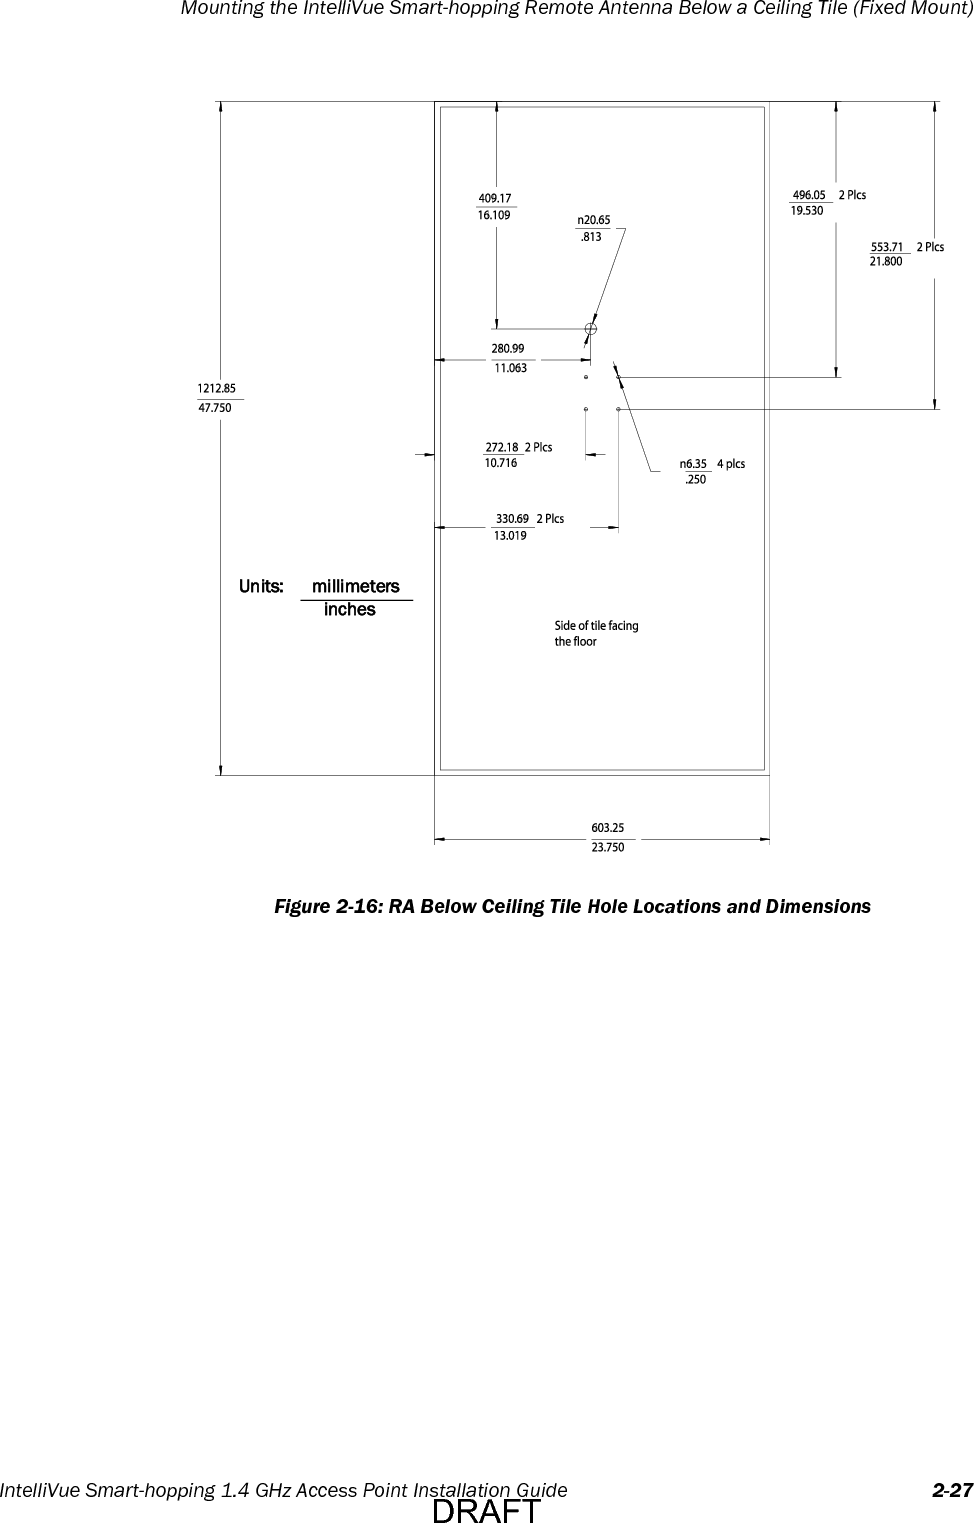 Mounting the IntelliVue Smart-hopping Remote Antenna Below a Ceiling Tile (Fixed Mount)IntelliVue Smart-hopping 1.4 GHz Access Point Installation Guide 2-27Figure 2-16: RA Below Ceiling Tile Hole Locations and DimensionsUnits: millimetersinchesDRAFT